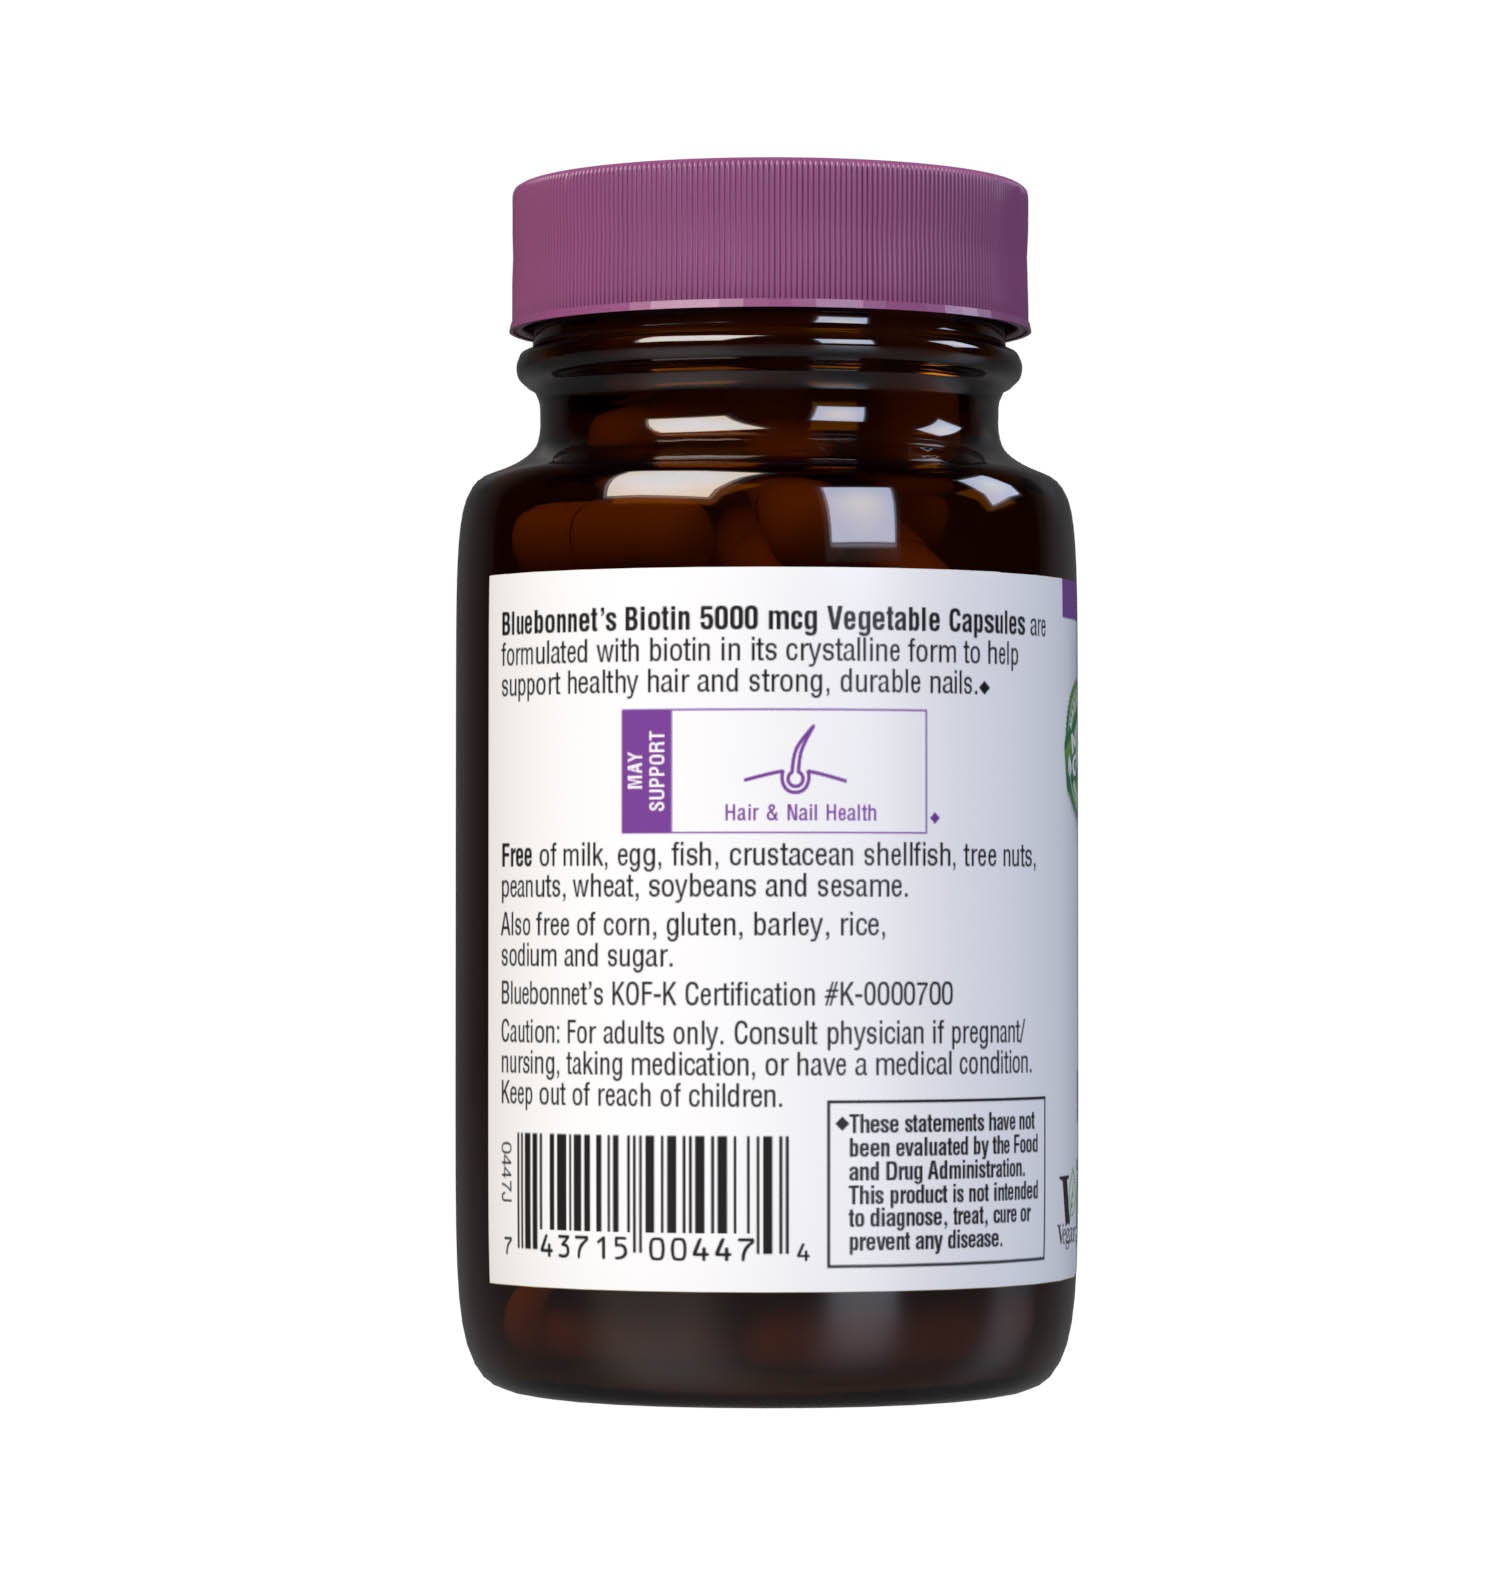 Bluebonnet’s Biotin 5000 mcg Capsules are formulated with yeast-free biotin in its crystalline form to support healthy hair and strong, durable nails. Description panel. #size_60 count